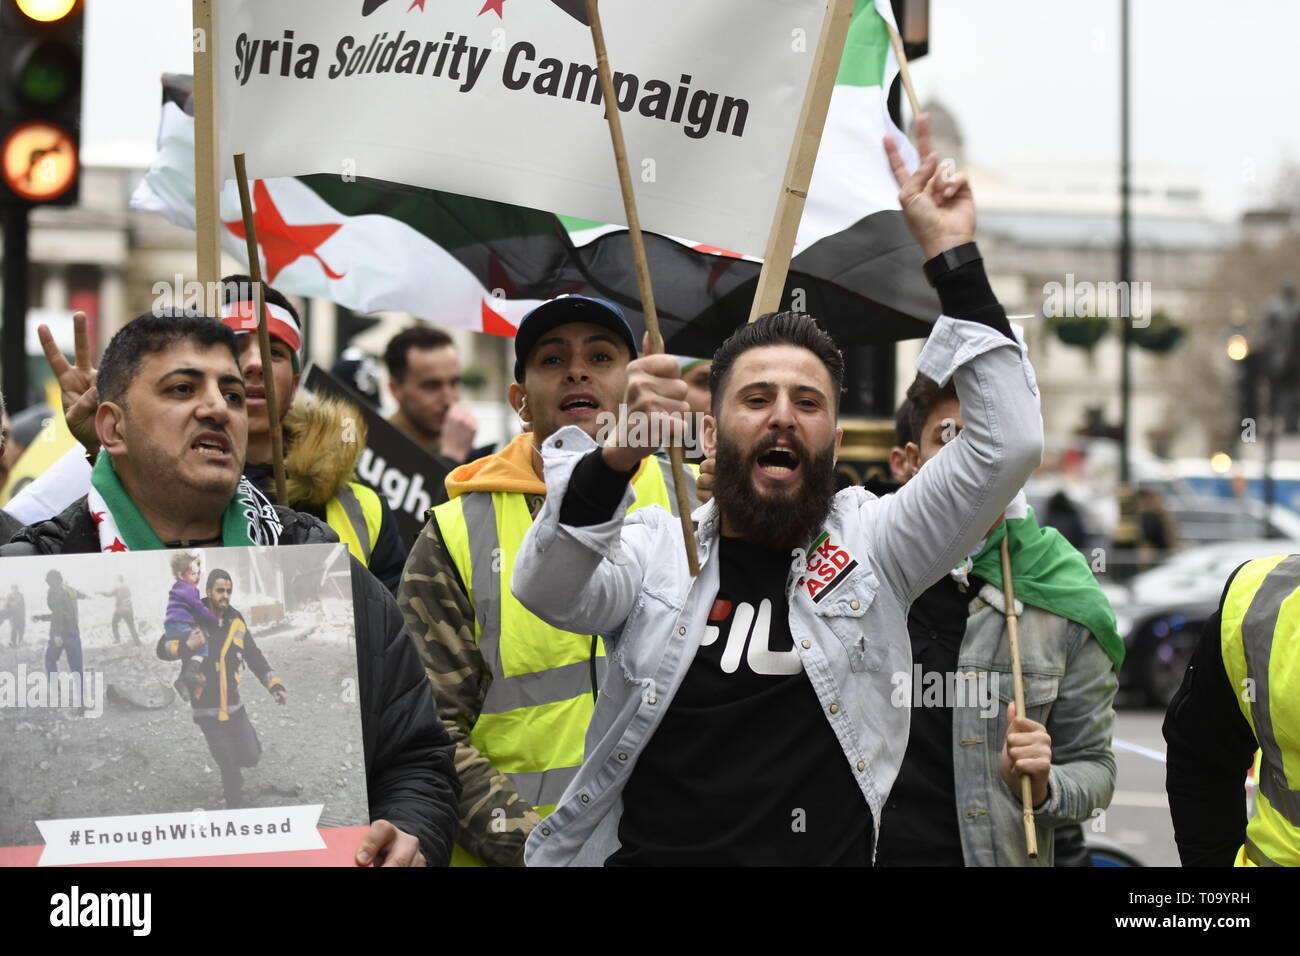 London, Greater London, UK. 16th Mar, 2019. Protesters are seen shouting slogans during the 8th Anniversary of the Syrian Revolution protest.Syrians marched from Paddington Green to Whitehall to demand for a peaceful solution of the war in Syria and restore democracy, they also call for an end of forced displacement, war crimes and foreign occupation in the country. Credit: Andres Pantoja/SOPA Images/ZUMA Wire/Alamy Live News Stock Photo